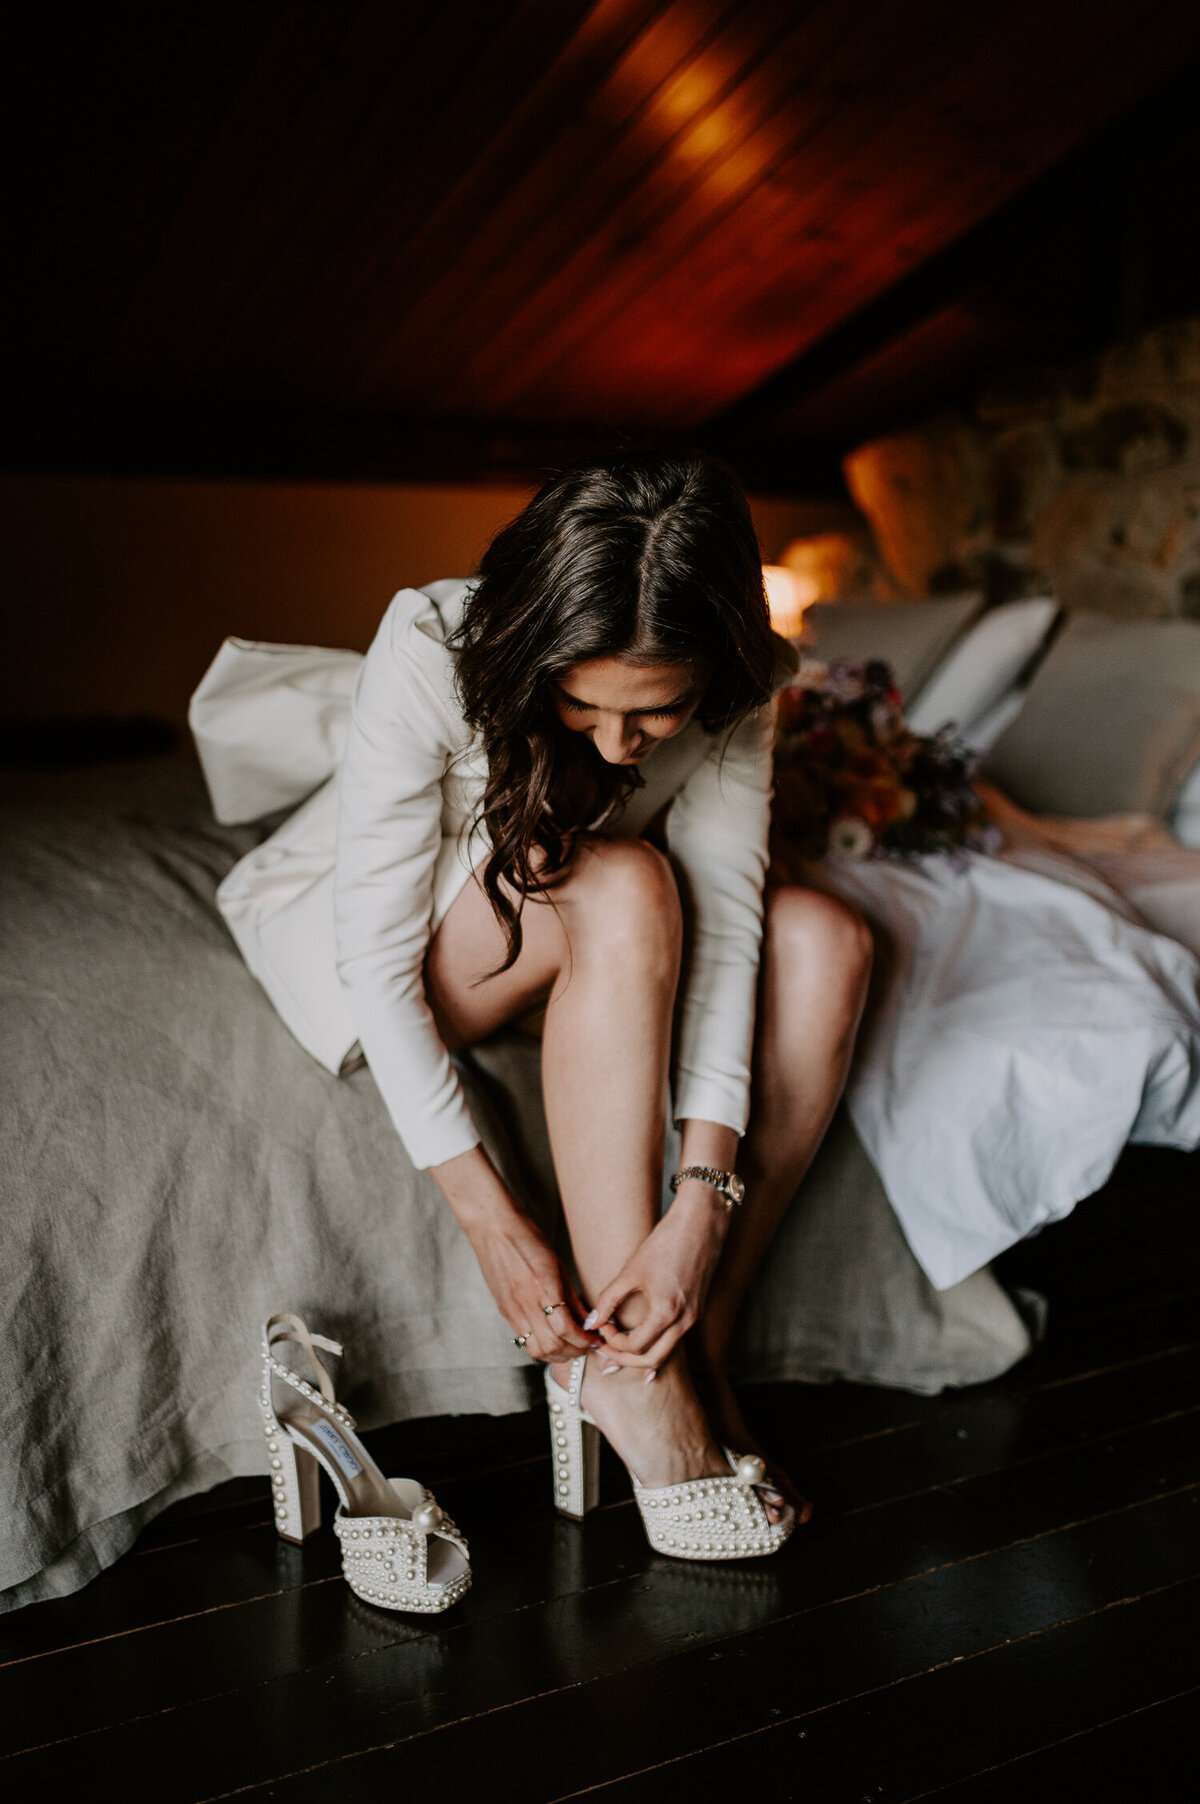 A bride changes from her fringed wedding dress into this shorter styled dress with long sleeves and a bow on the back She is sitting on a bed fastening her Jimmy Choo heels.